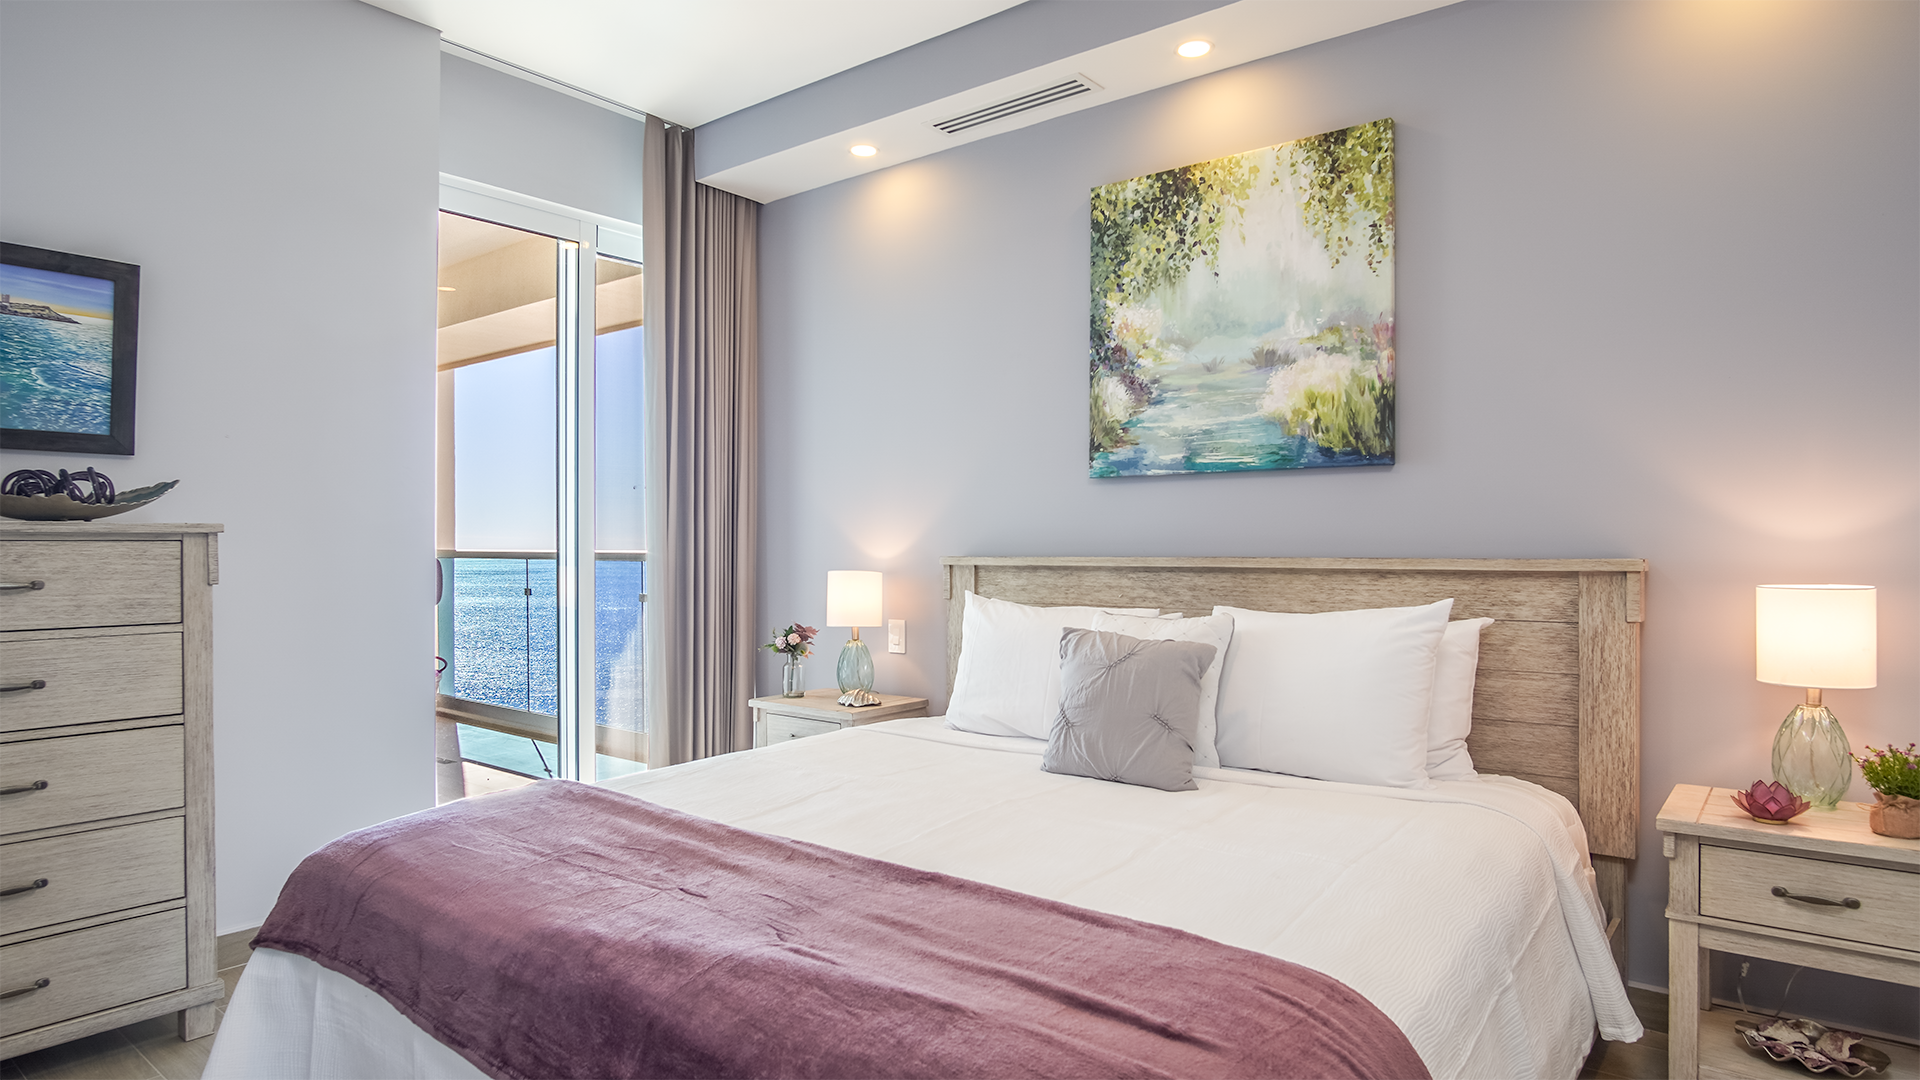 Second bedroom with king bed, and sliding glass doors that go out to the terrace with ocean views.